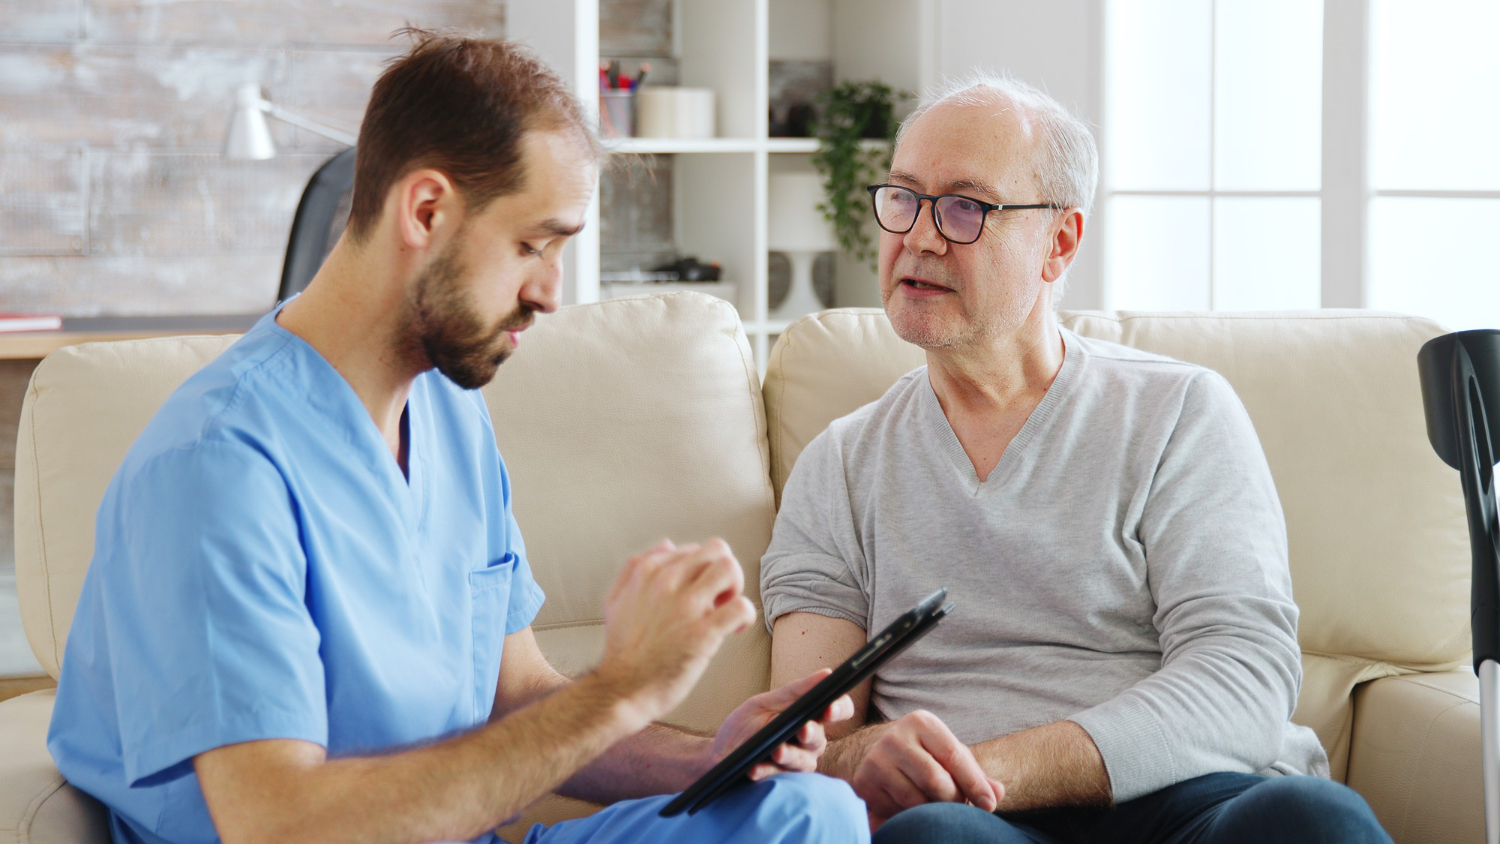 An older adult man wearing a grey shirt sits next to an assisted living nurse wearing blue scrubs. The nurse is holding and looking at a tablet.